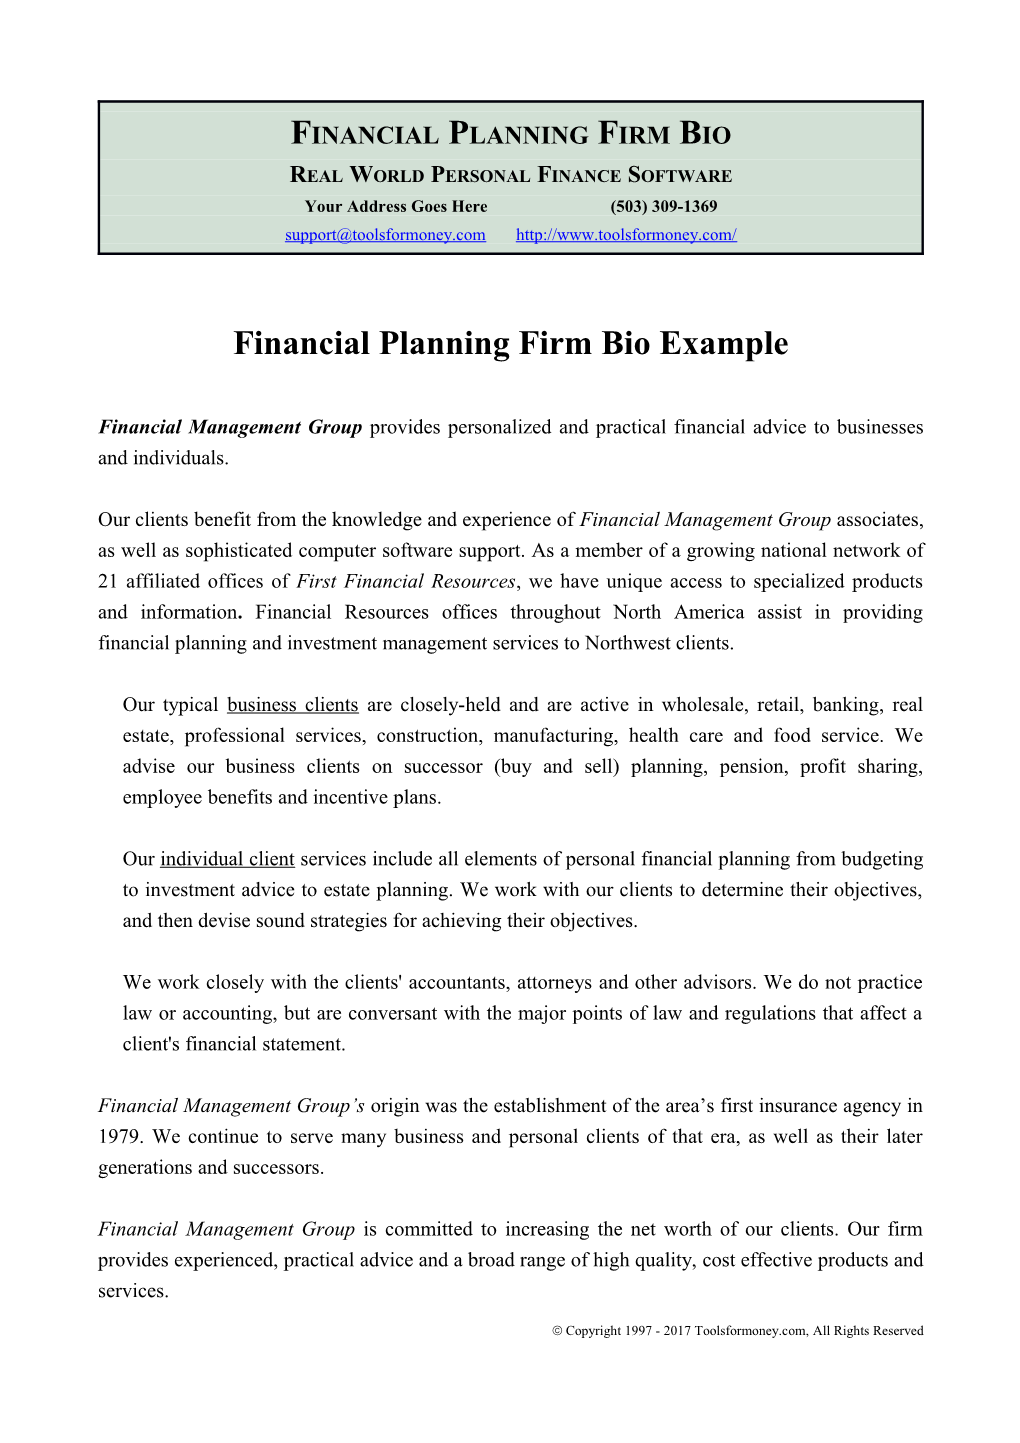 Financial Planning Firm Bio Example